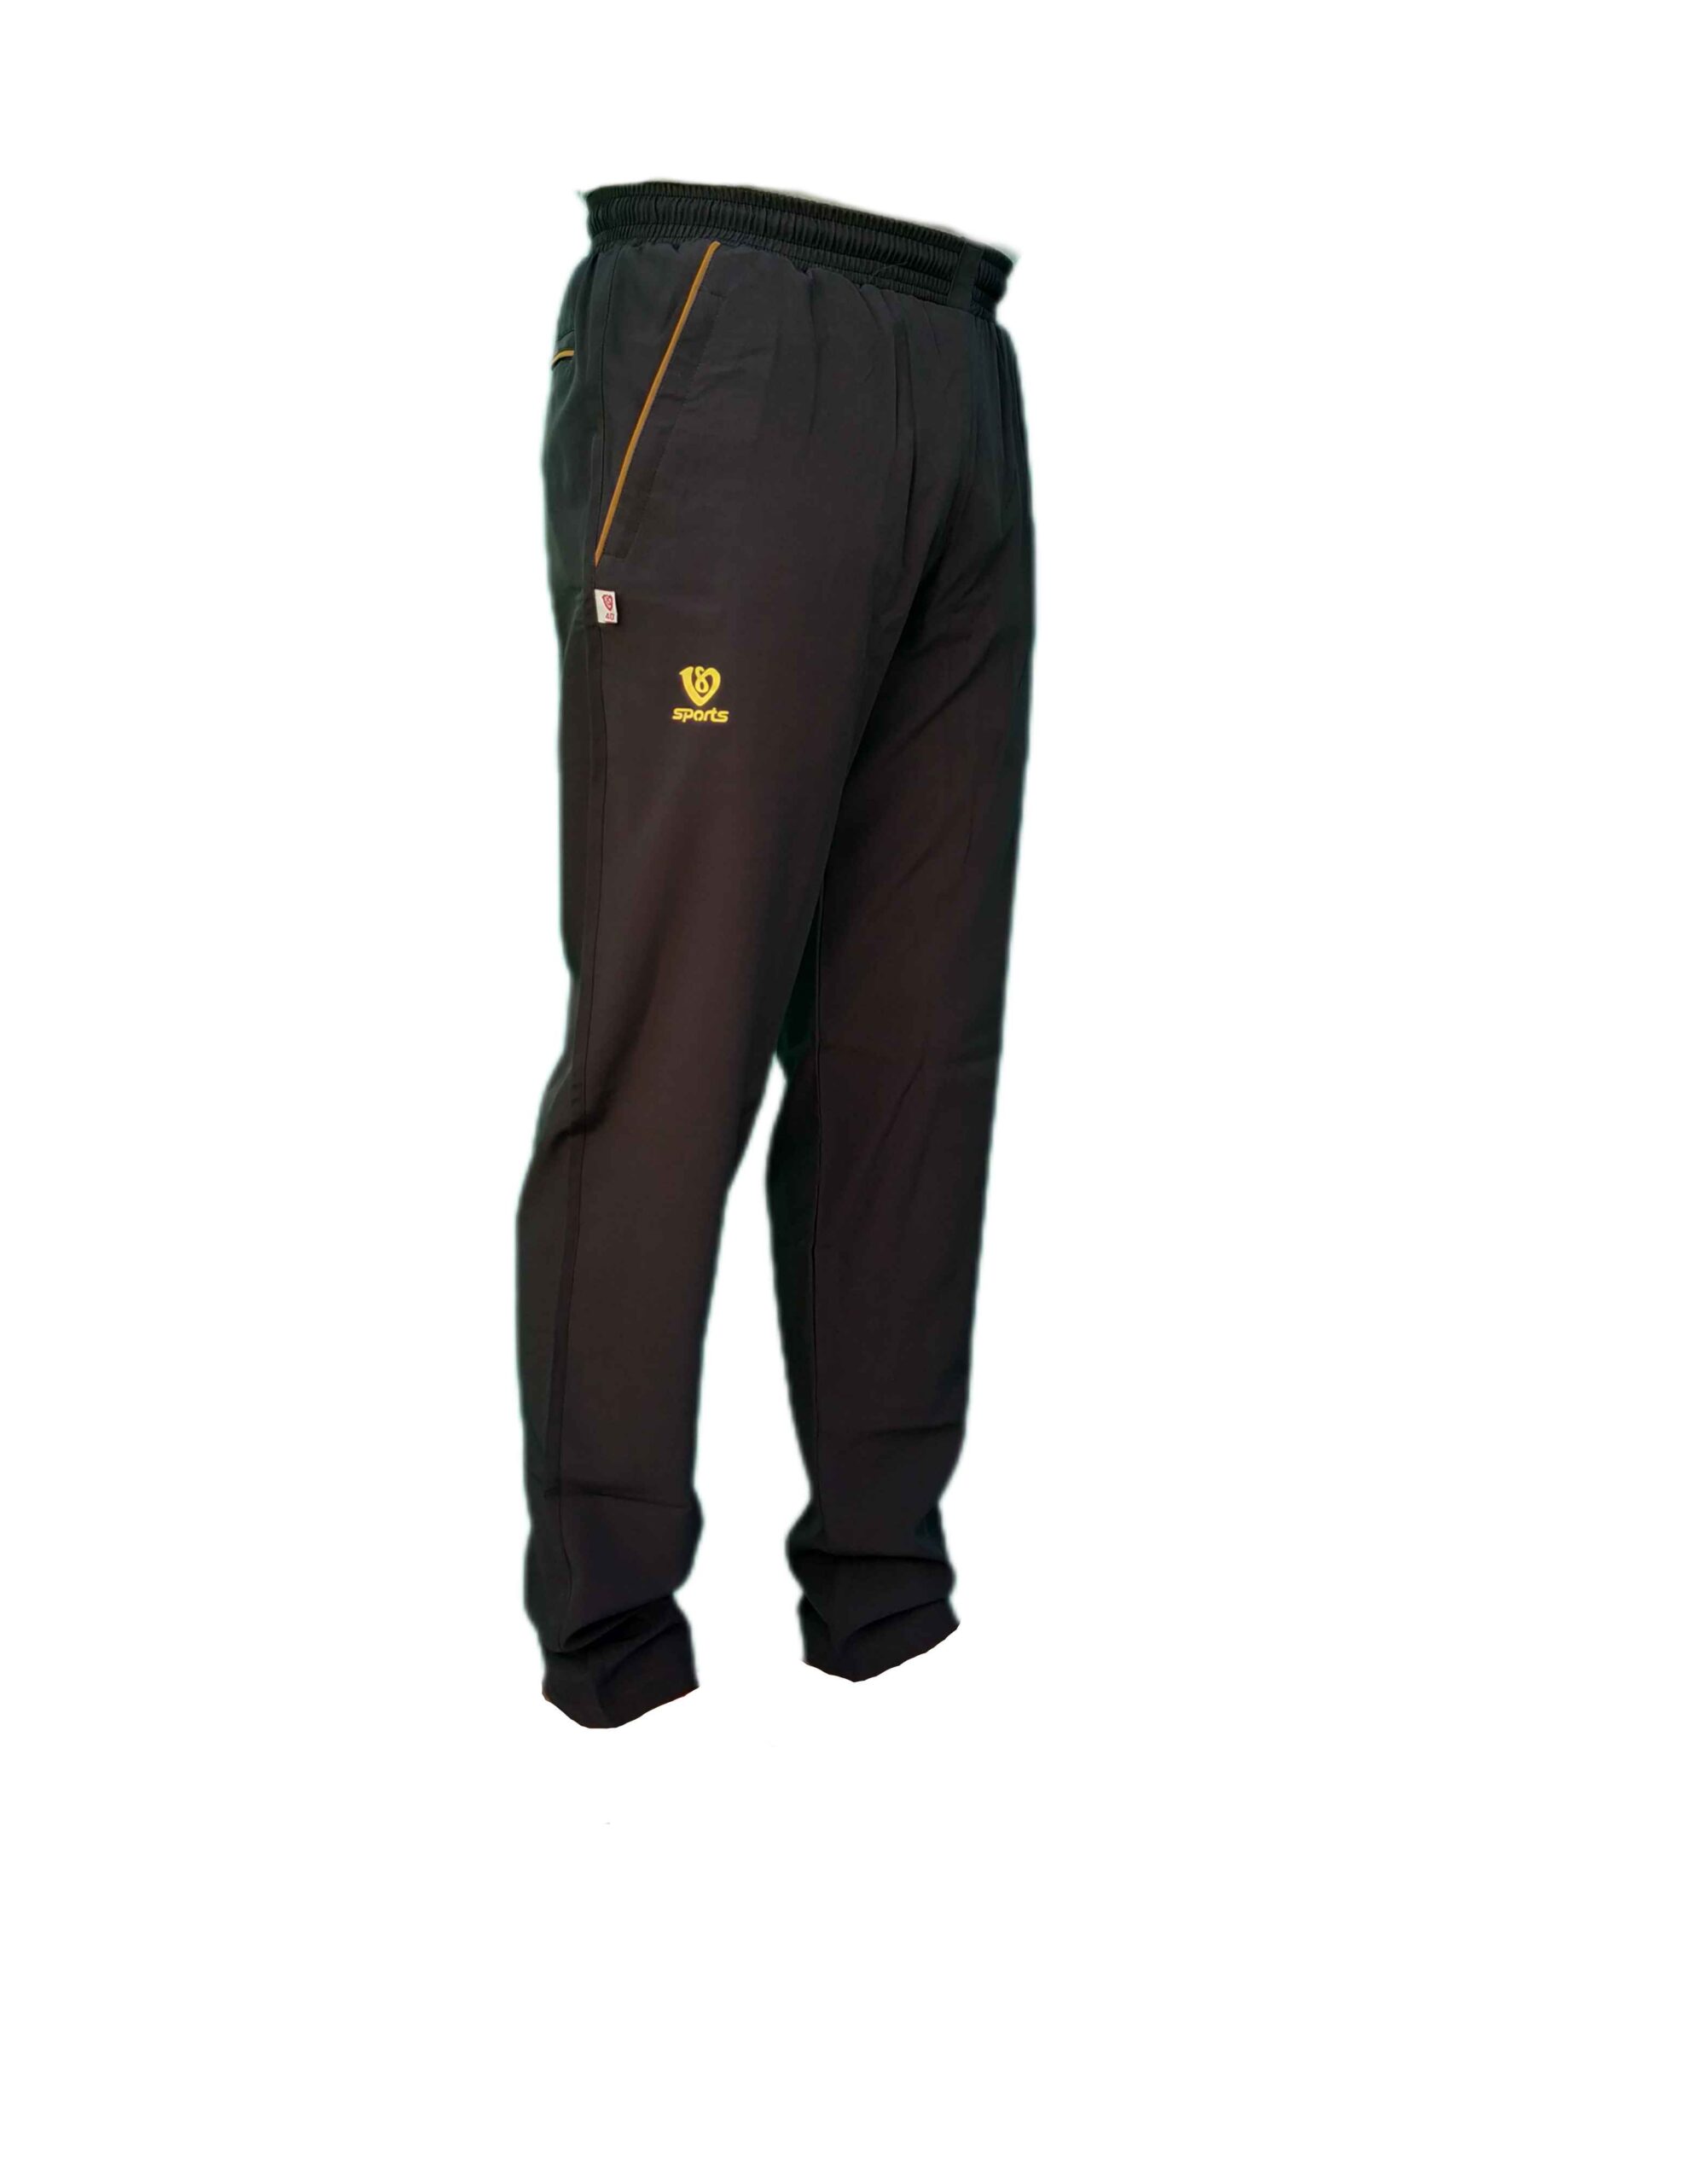 Trackpants: Explore Men Olive Polyester Trackpants on Cliths.com